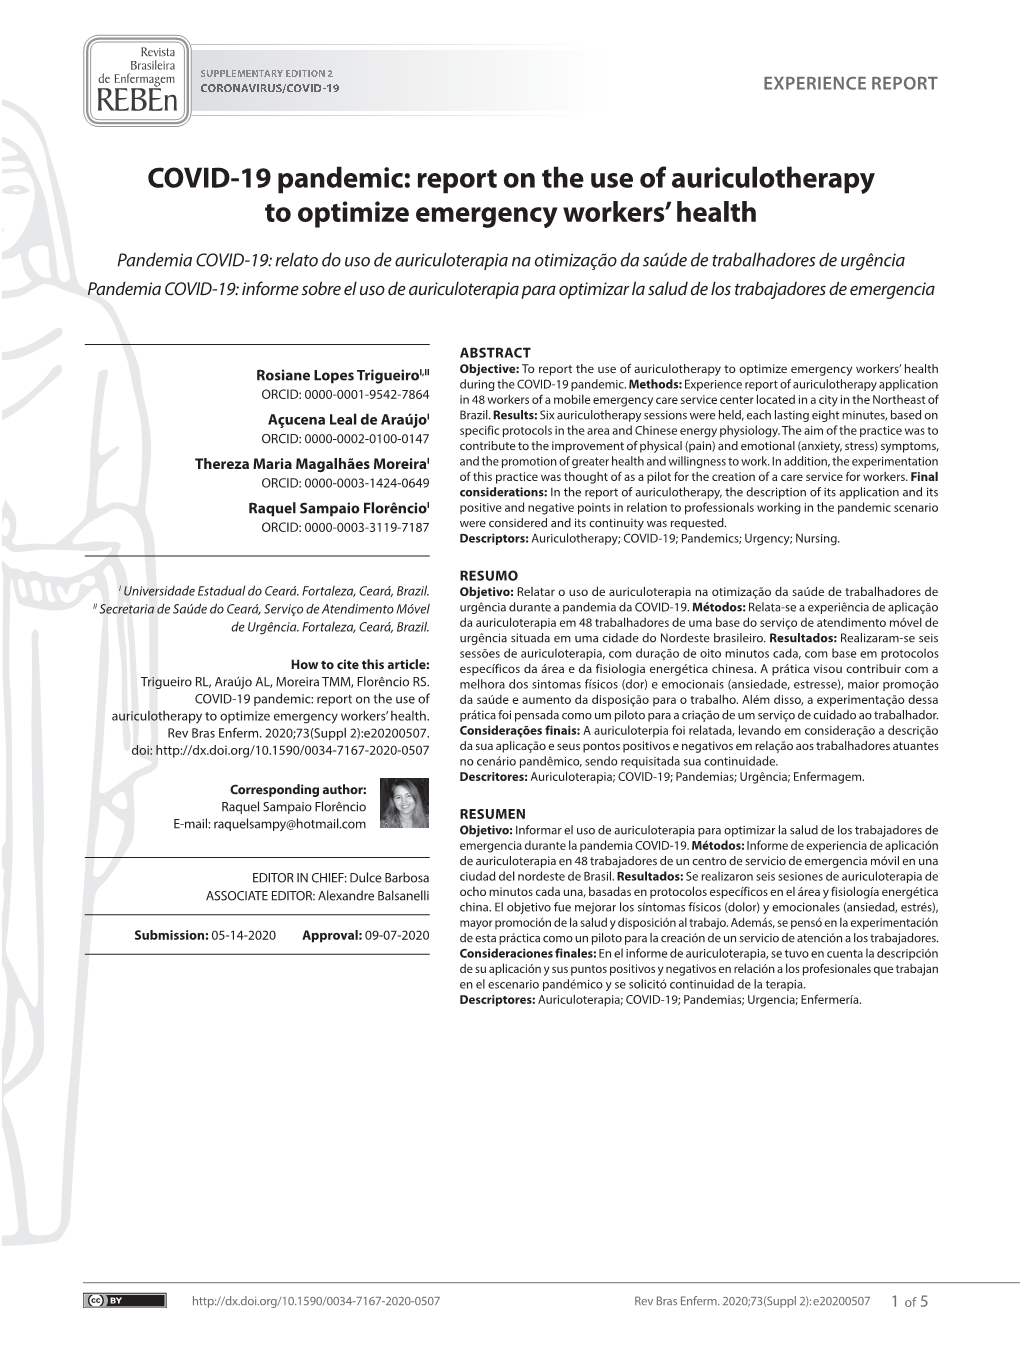 COVID-19 Pandemic: Report on the Use of Auriculotherapy to Optimize Emergency Workers’ Health